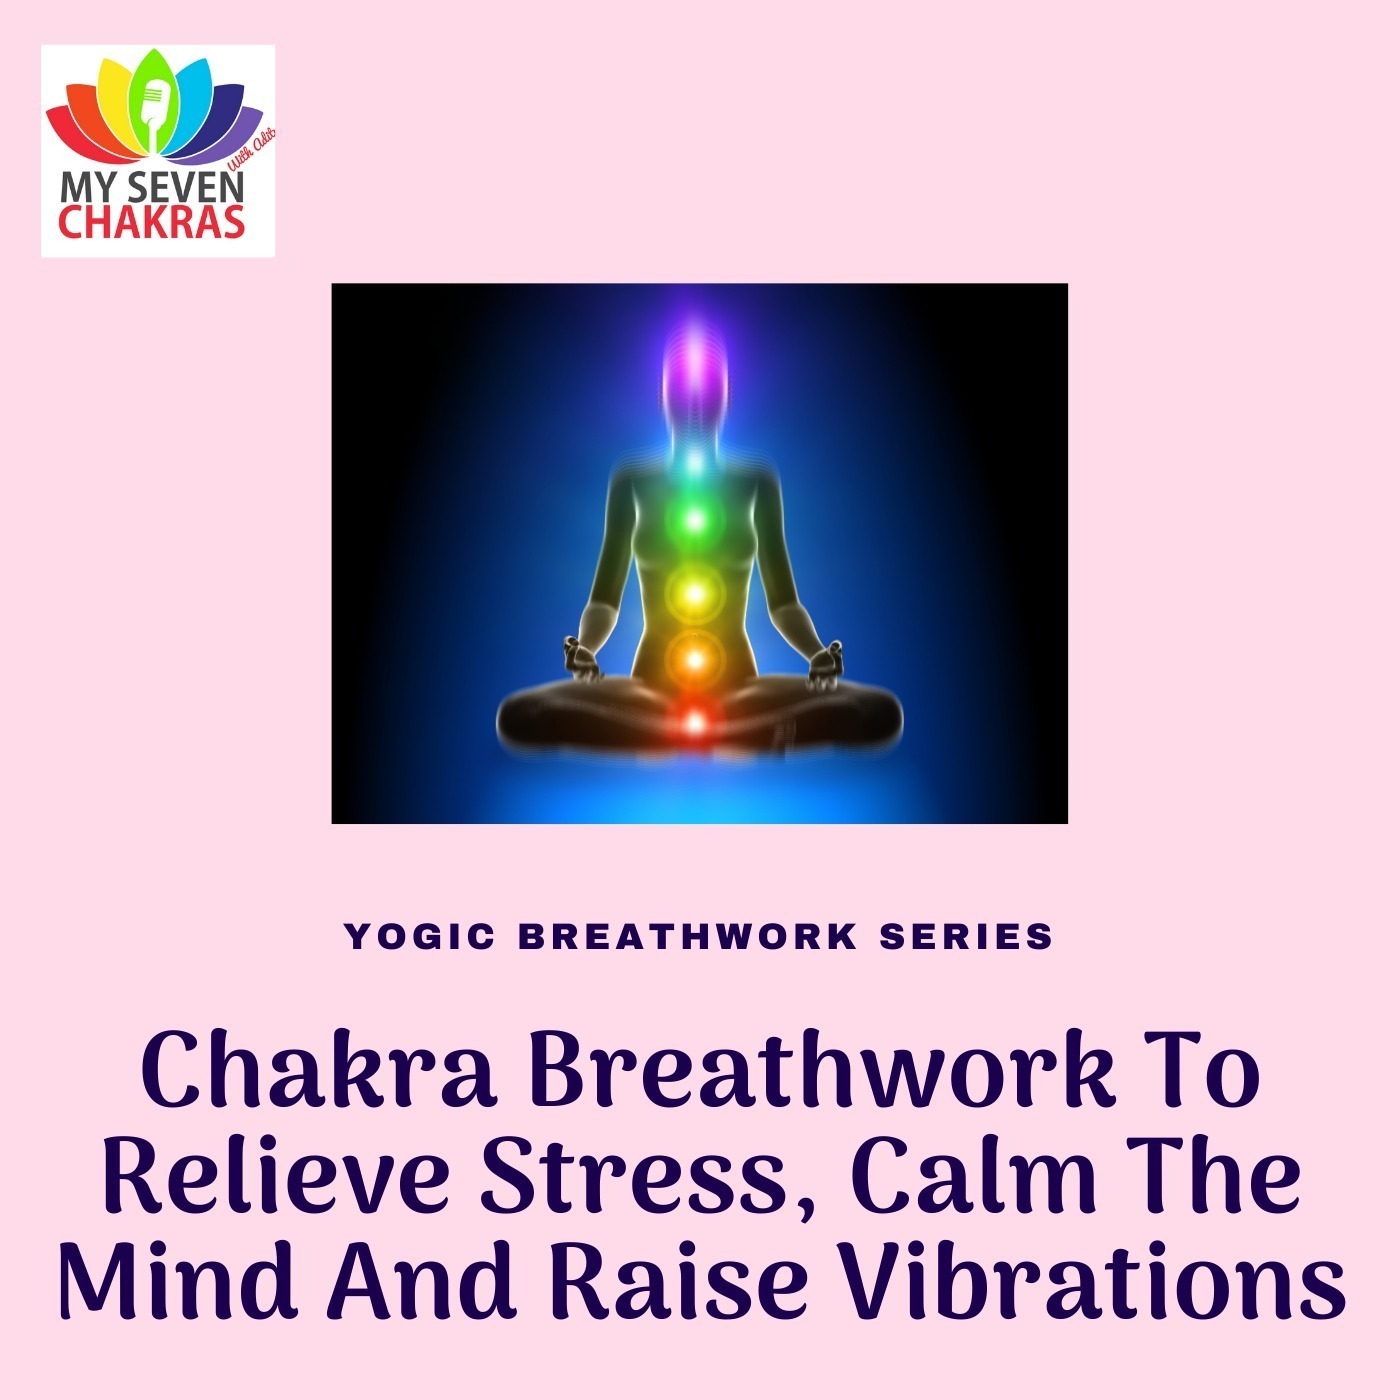 Chakra Breathwork To Relieve Stress, Calm The Mind And Raise Vibrations